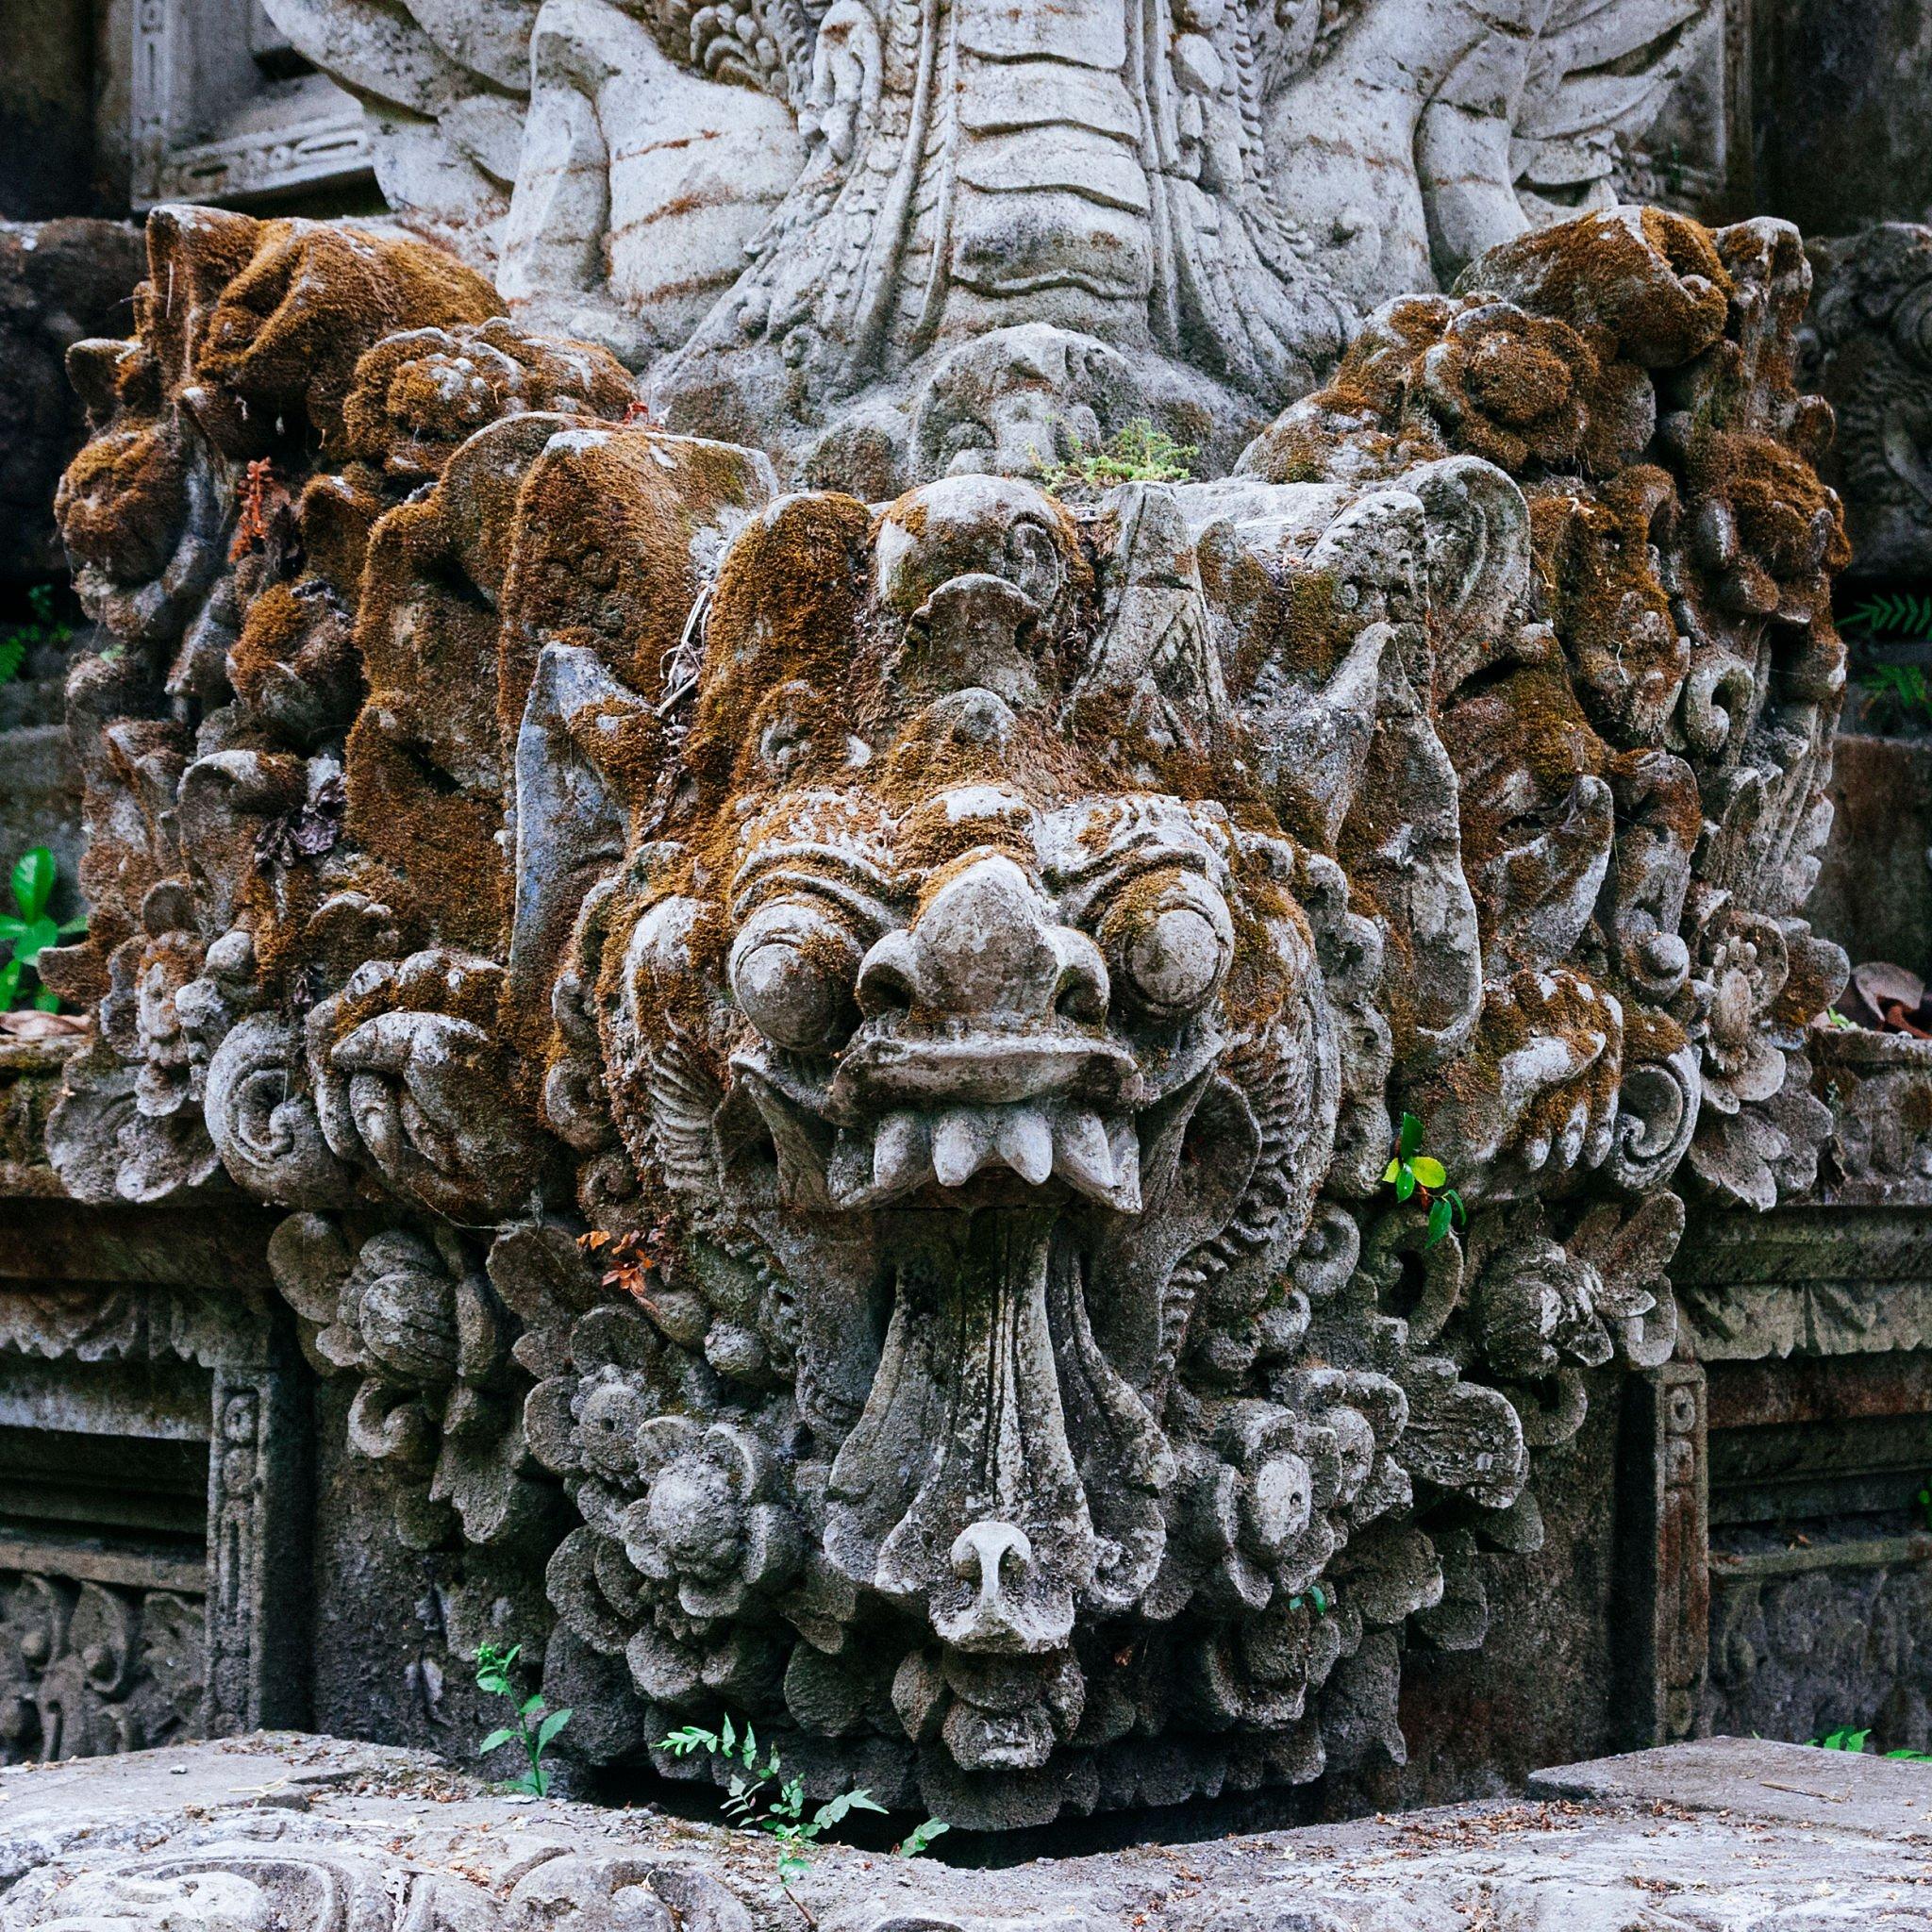 The statue of Barong; proof that it has been existed for centuries